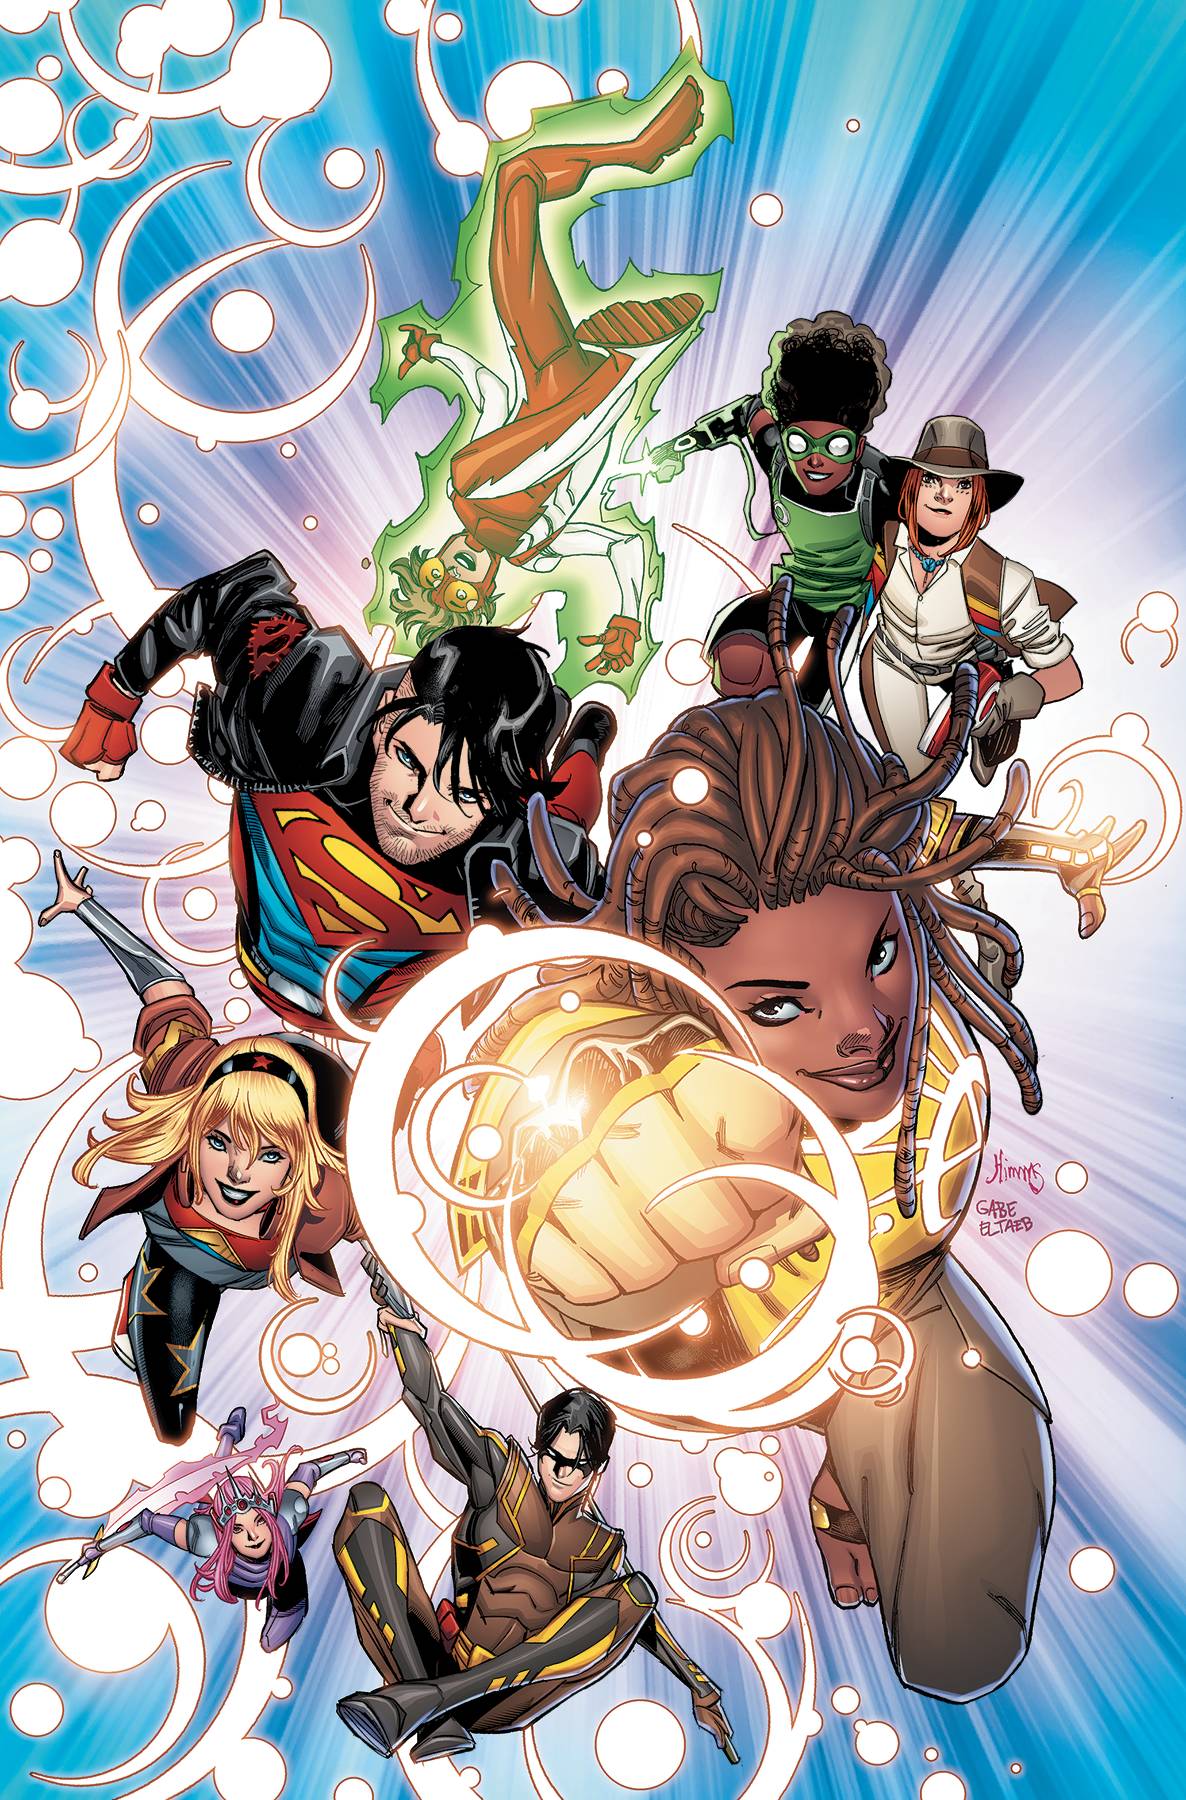 11/06/2019 YOUNG JUSTICE #10